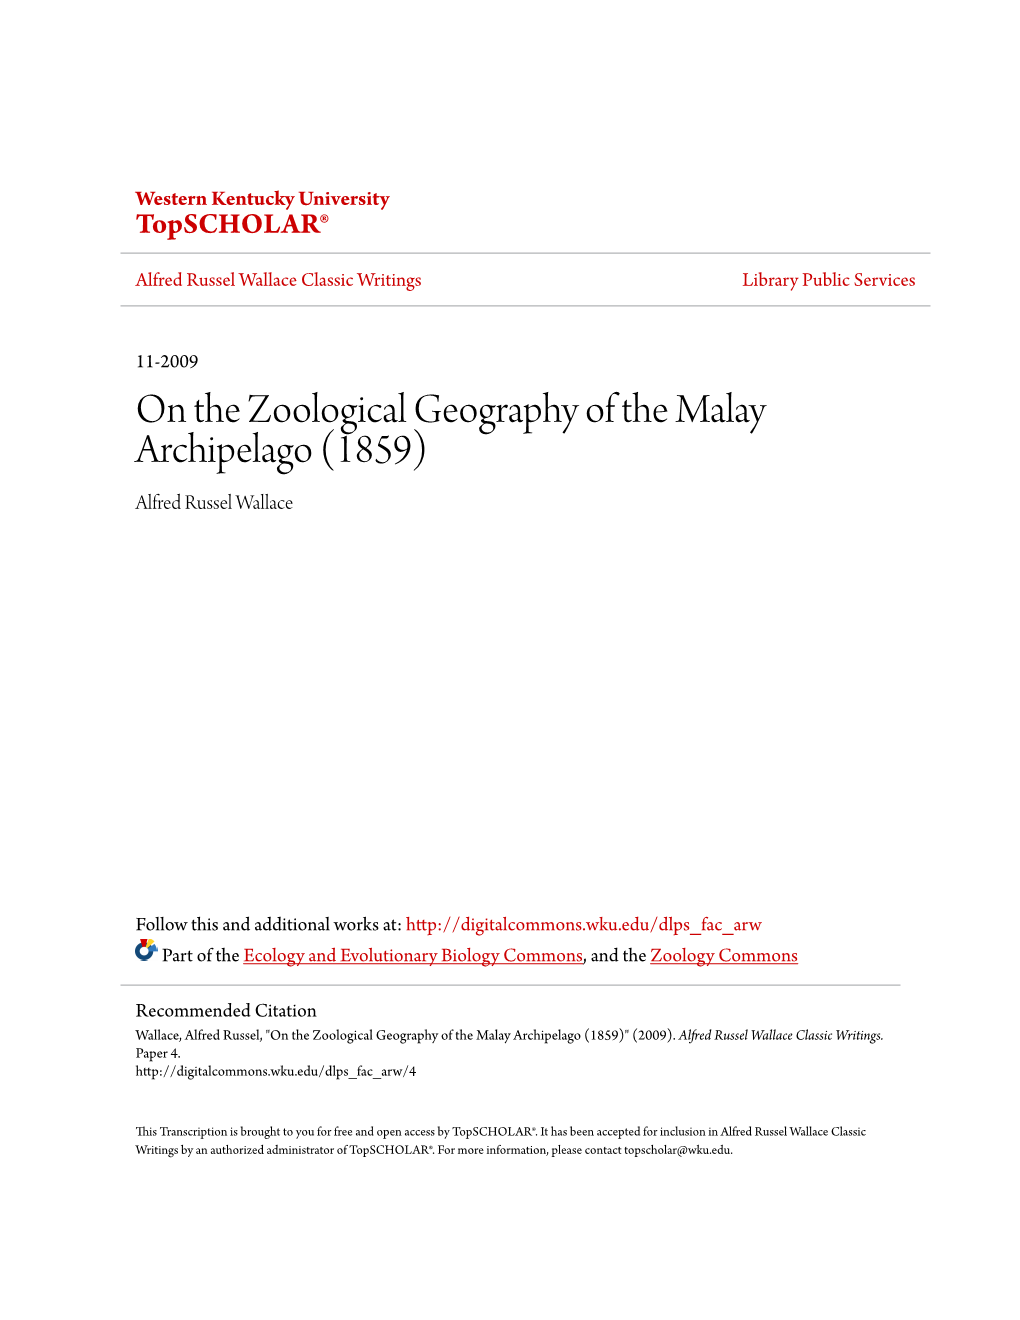 On the Zoological Geography of the Malay Archipelago (1859) Alfred Russel Wallace